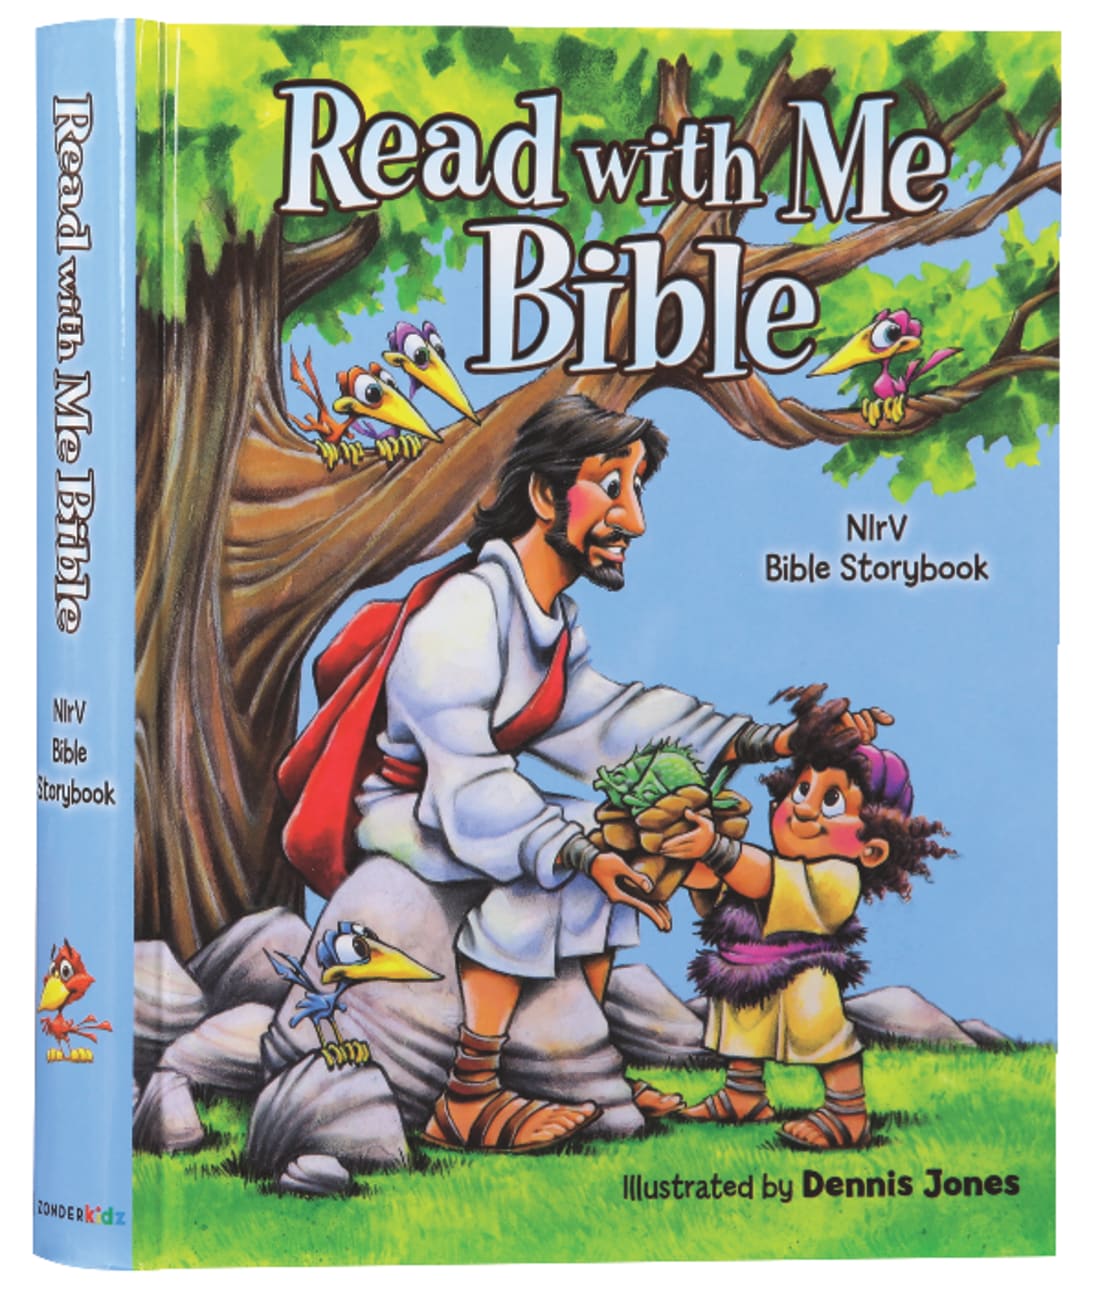 READ WITH ME BIBLE (REVISED 2000) AN NIRV STORY BIBLE